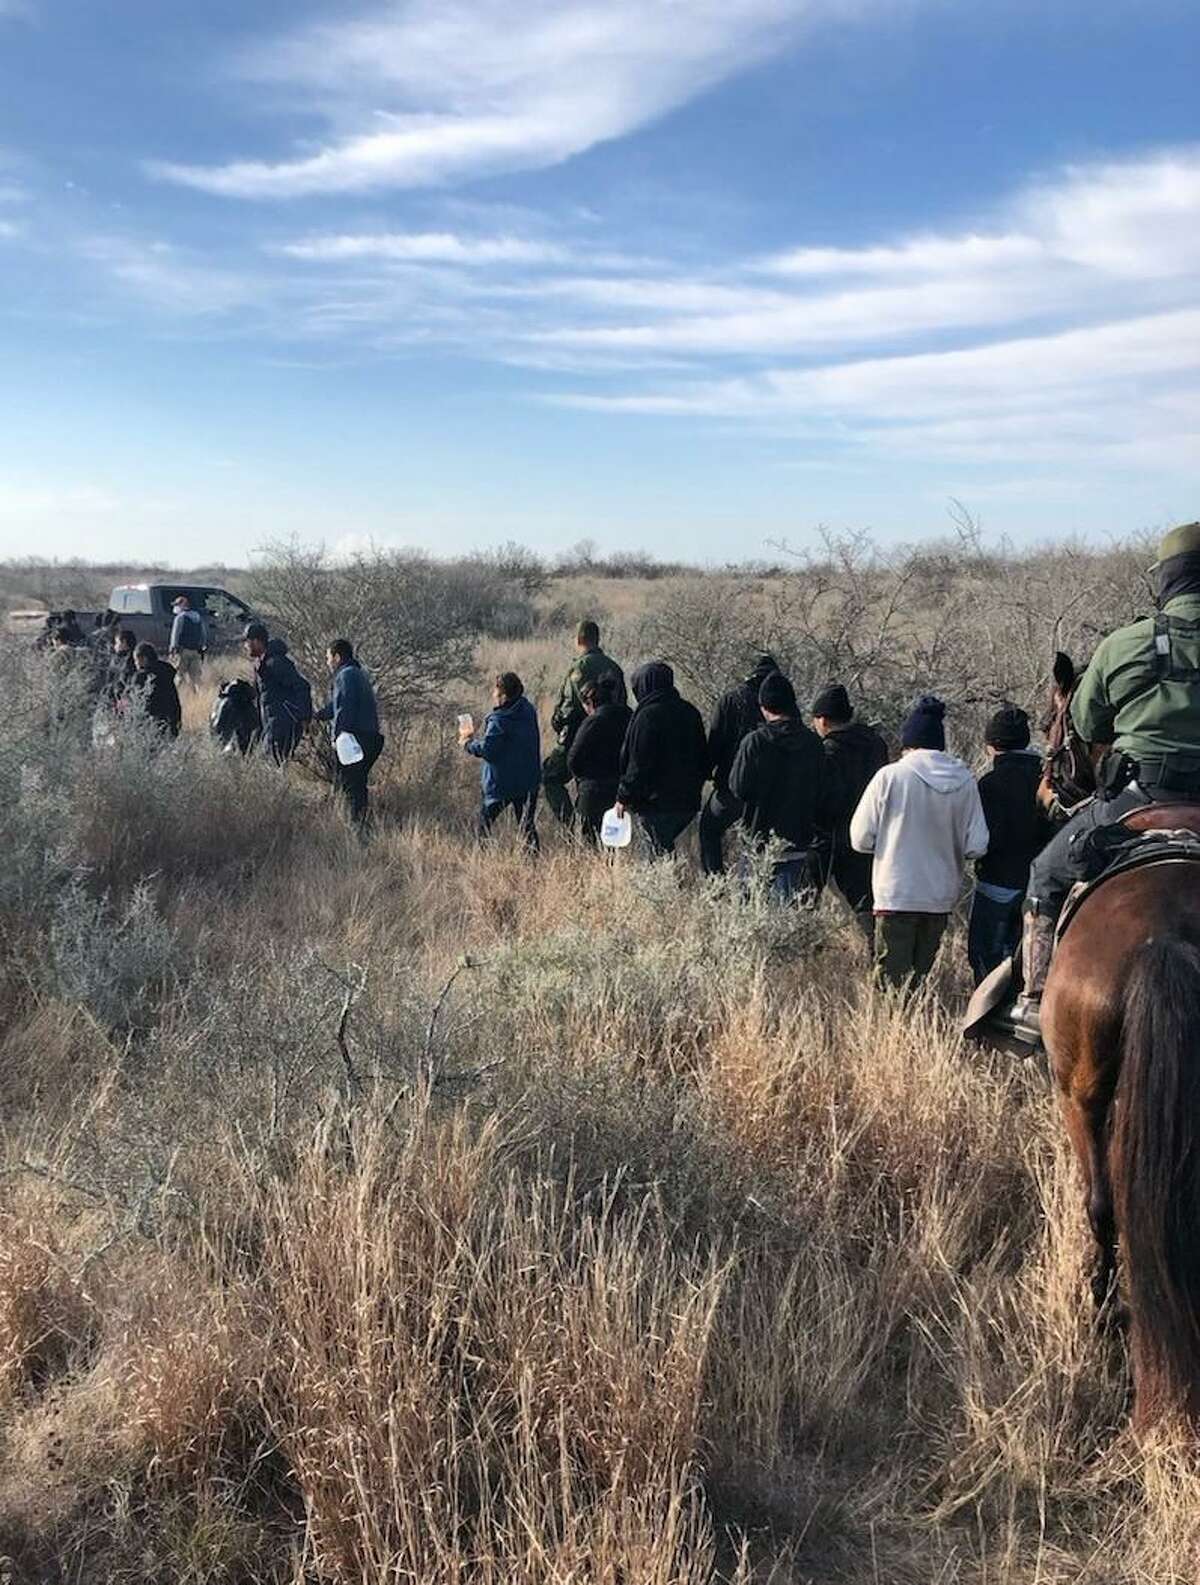 Laredo Sector Horse Patrol unit detained 125 people accused of crossing the border illegally.